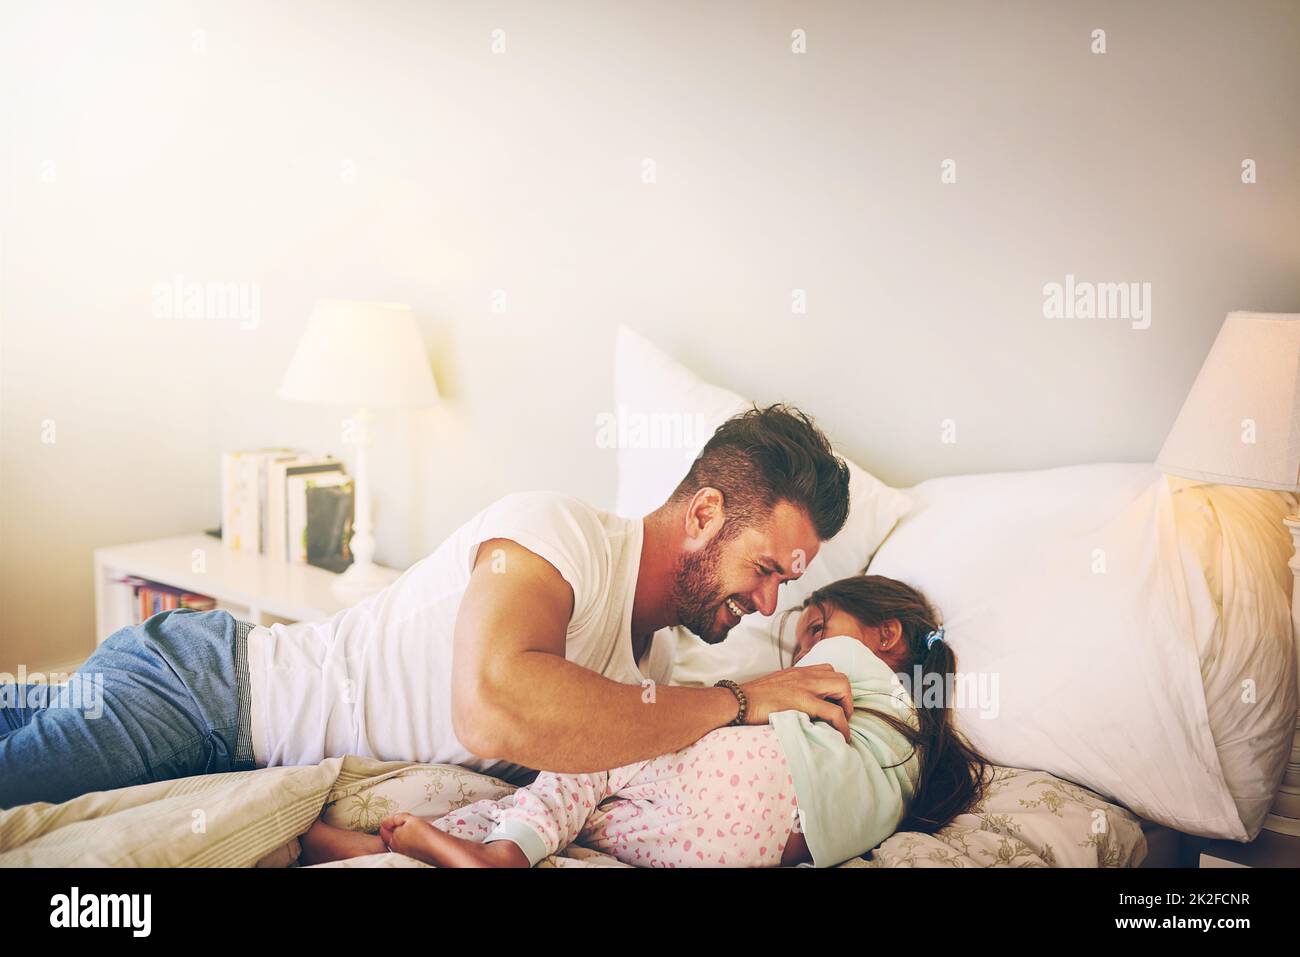 At home with dad. Shot of a cheerful father and daughter having a tickle fight on the bed at home. Stock Photo